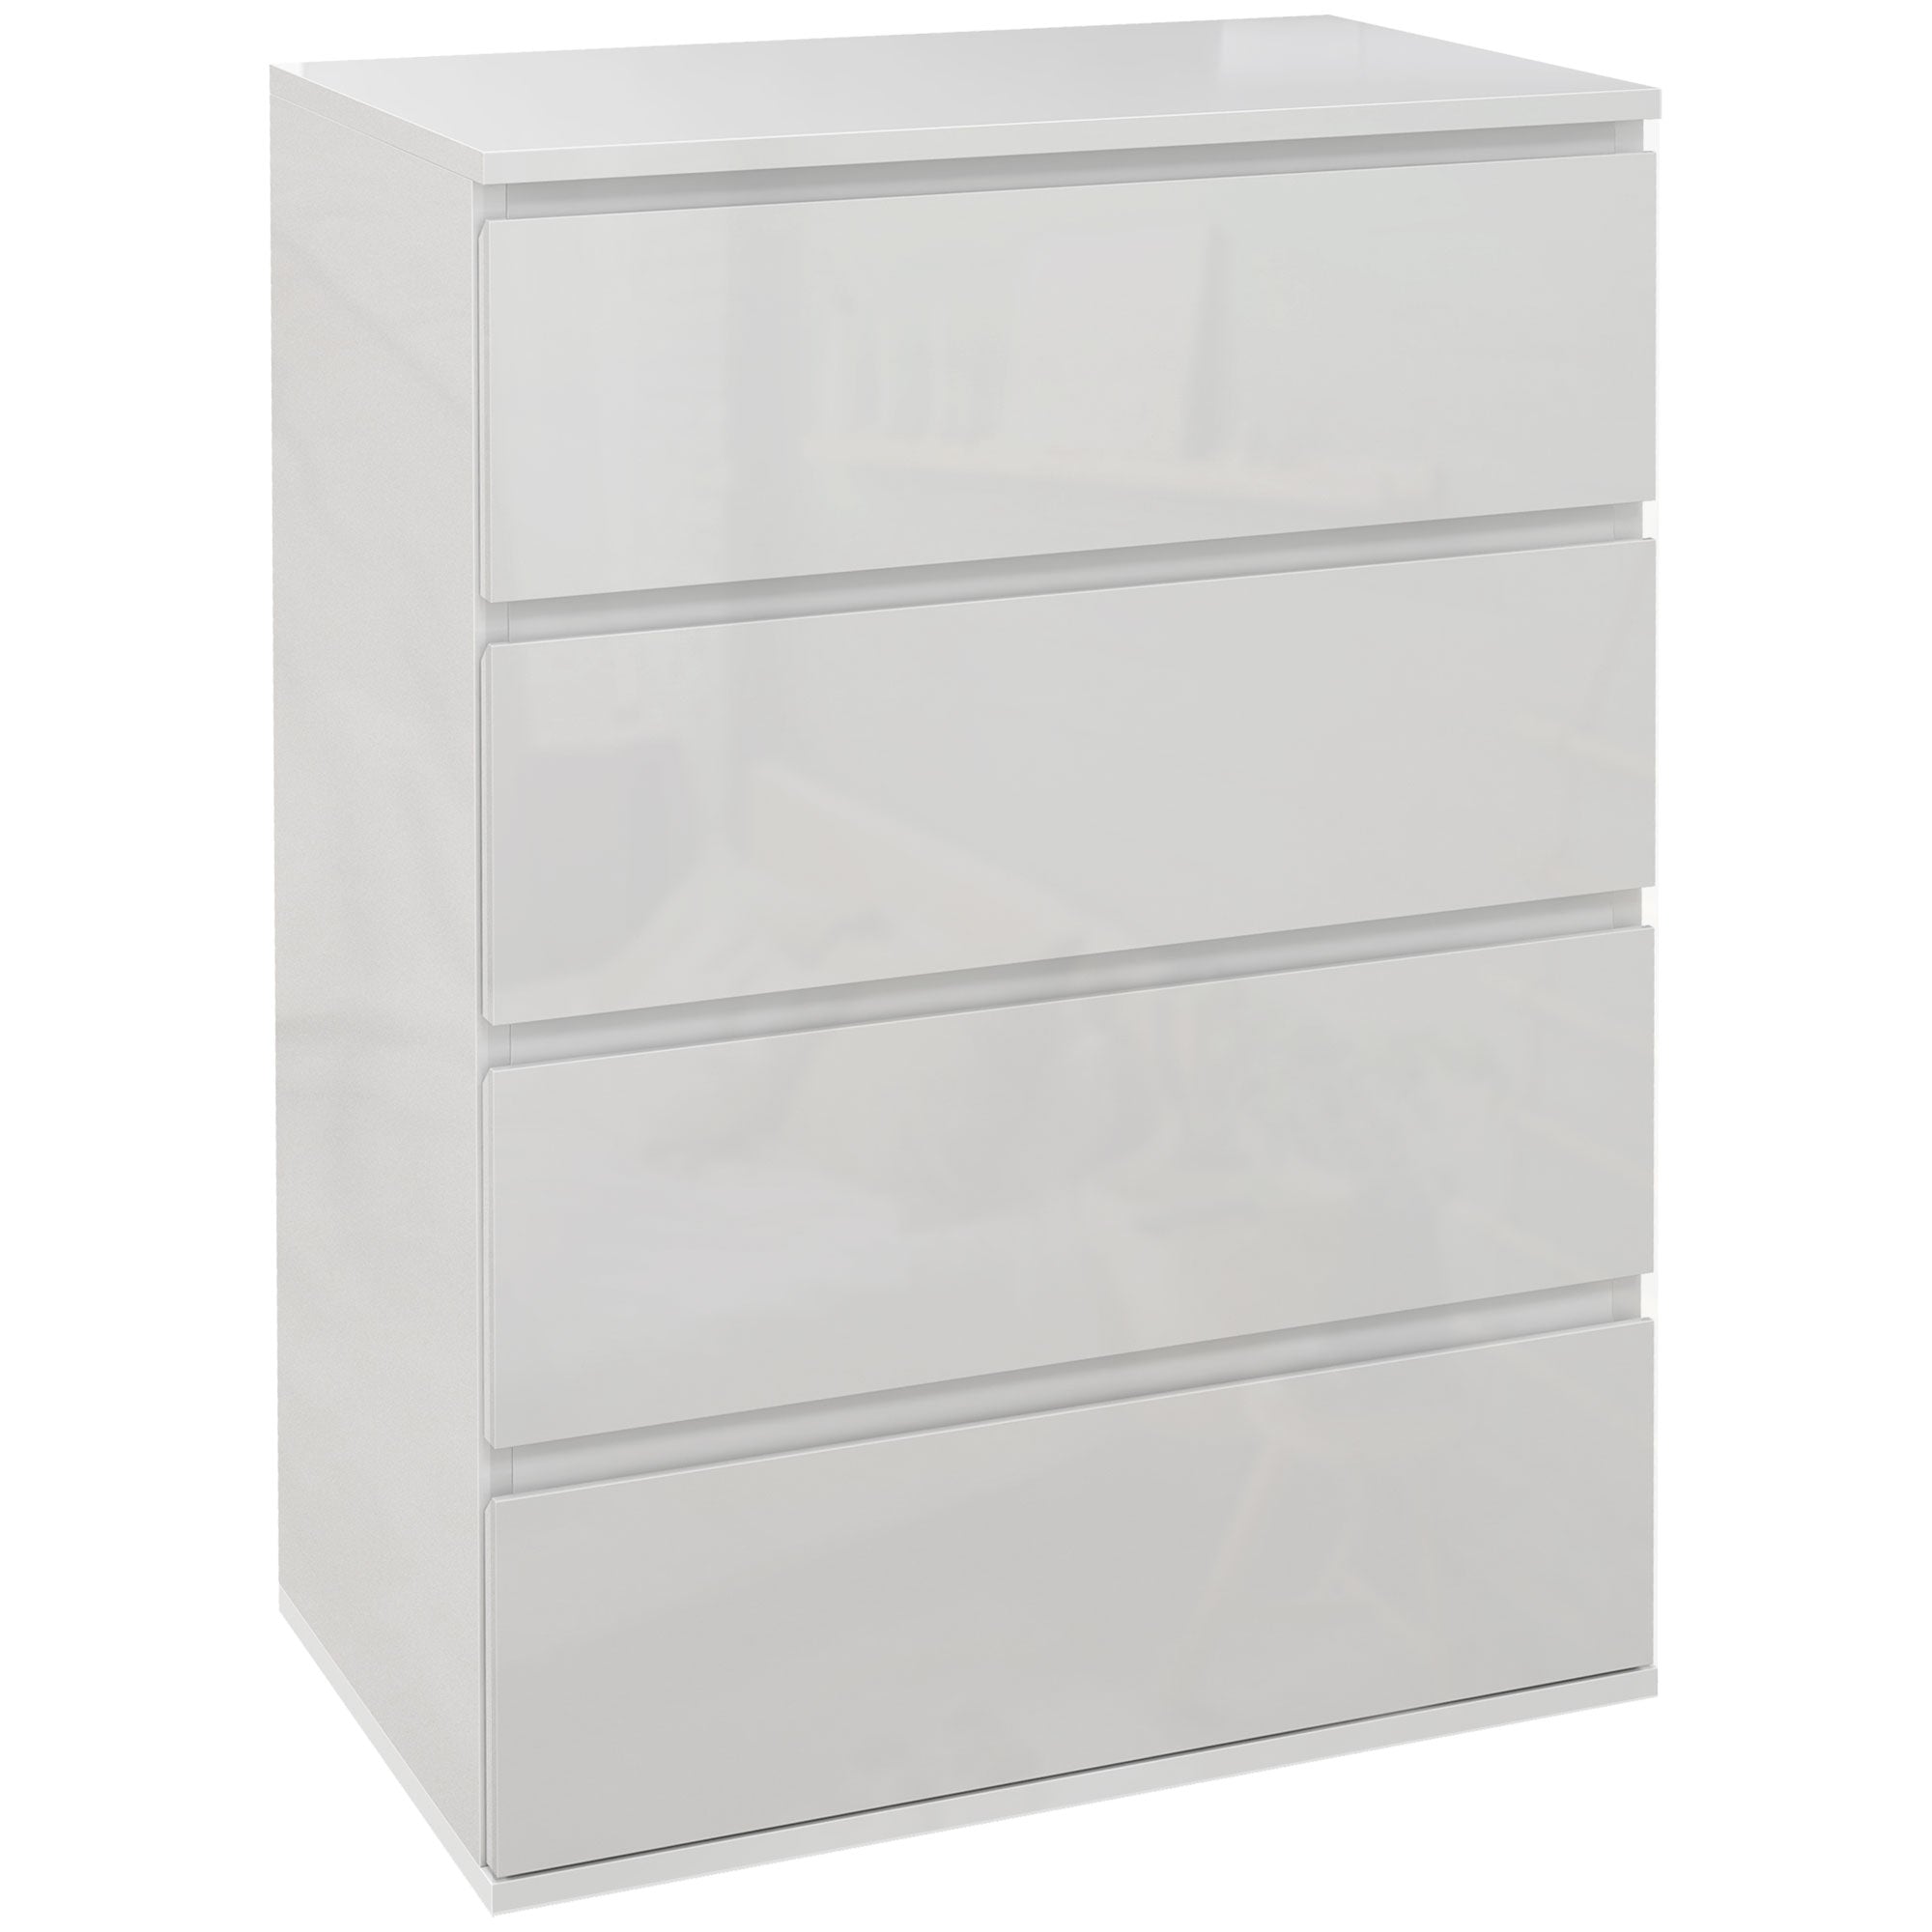 High Gloss 4 Drawer Chest Of Drawers,4-Drawer Storage Cabinets, Modern Dresser, Storage Drawer Unit for Bedroom, White-0